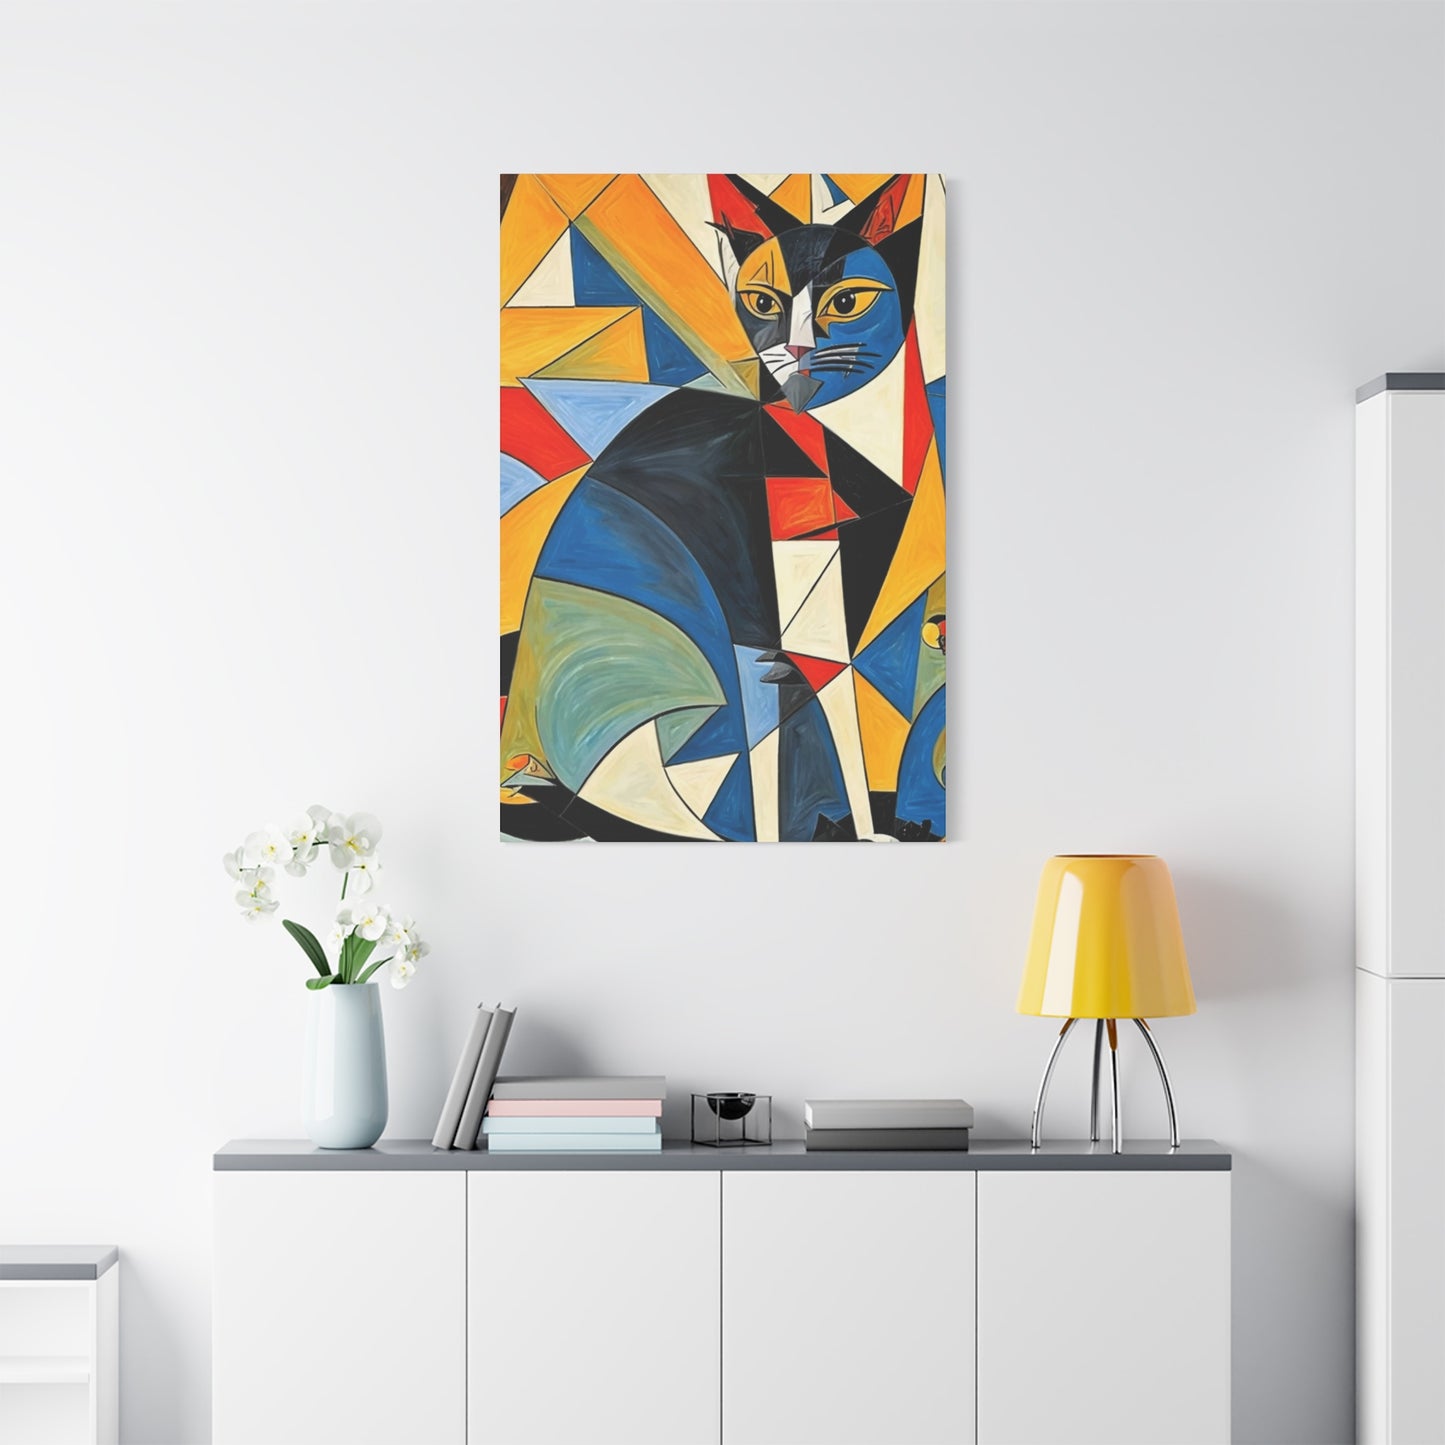 Cubism Wall Art and Canvas Prints